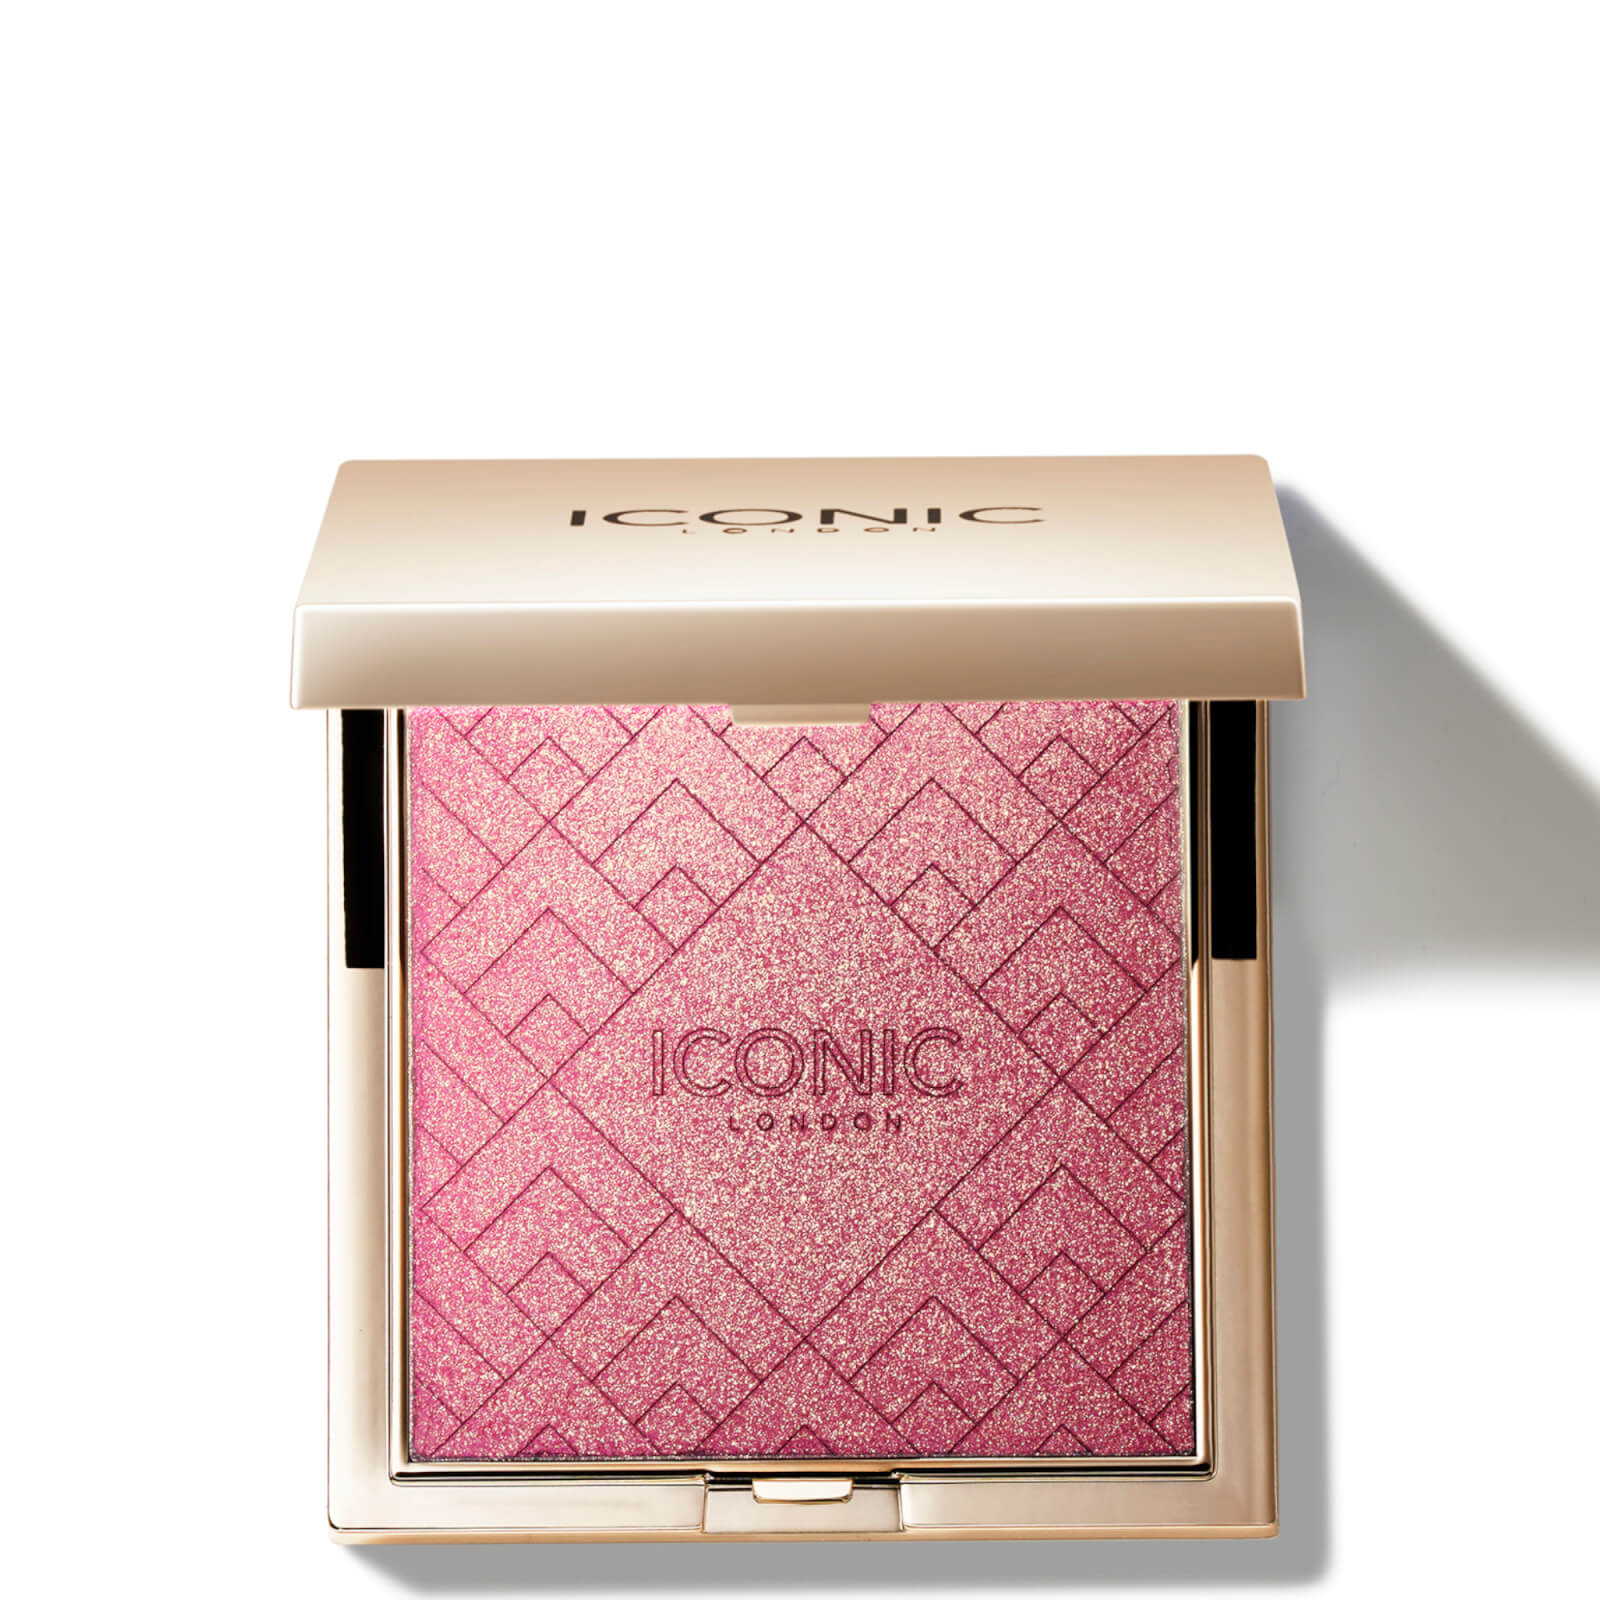 ICONIC London Kissed by the Sun Multi-Use Cheek Glow Exclusive (Various Shades) - Play Time